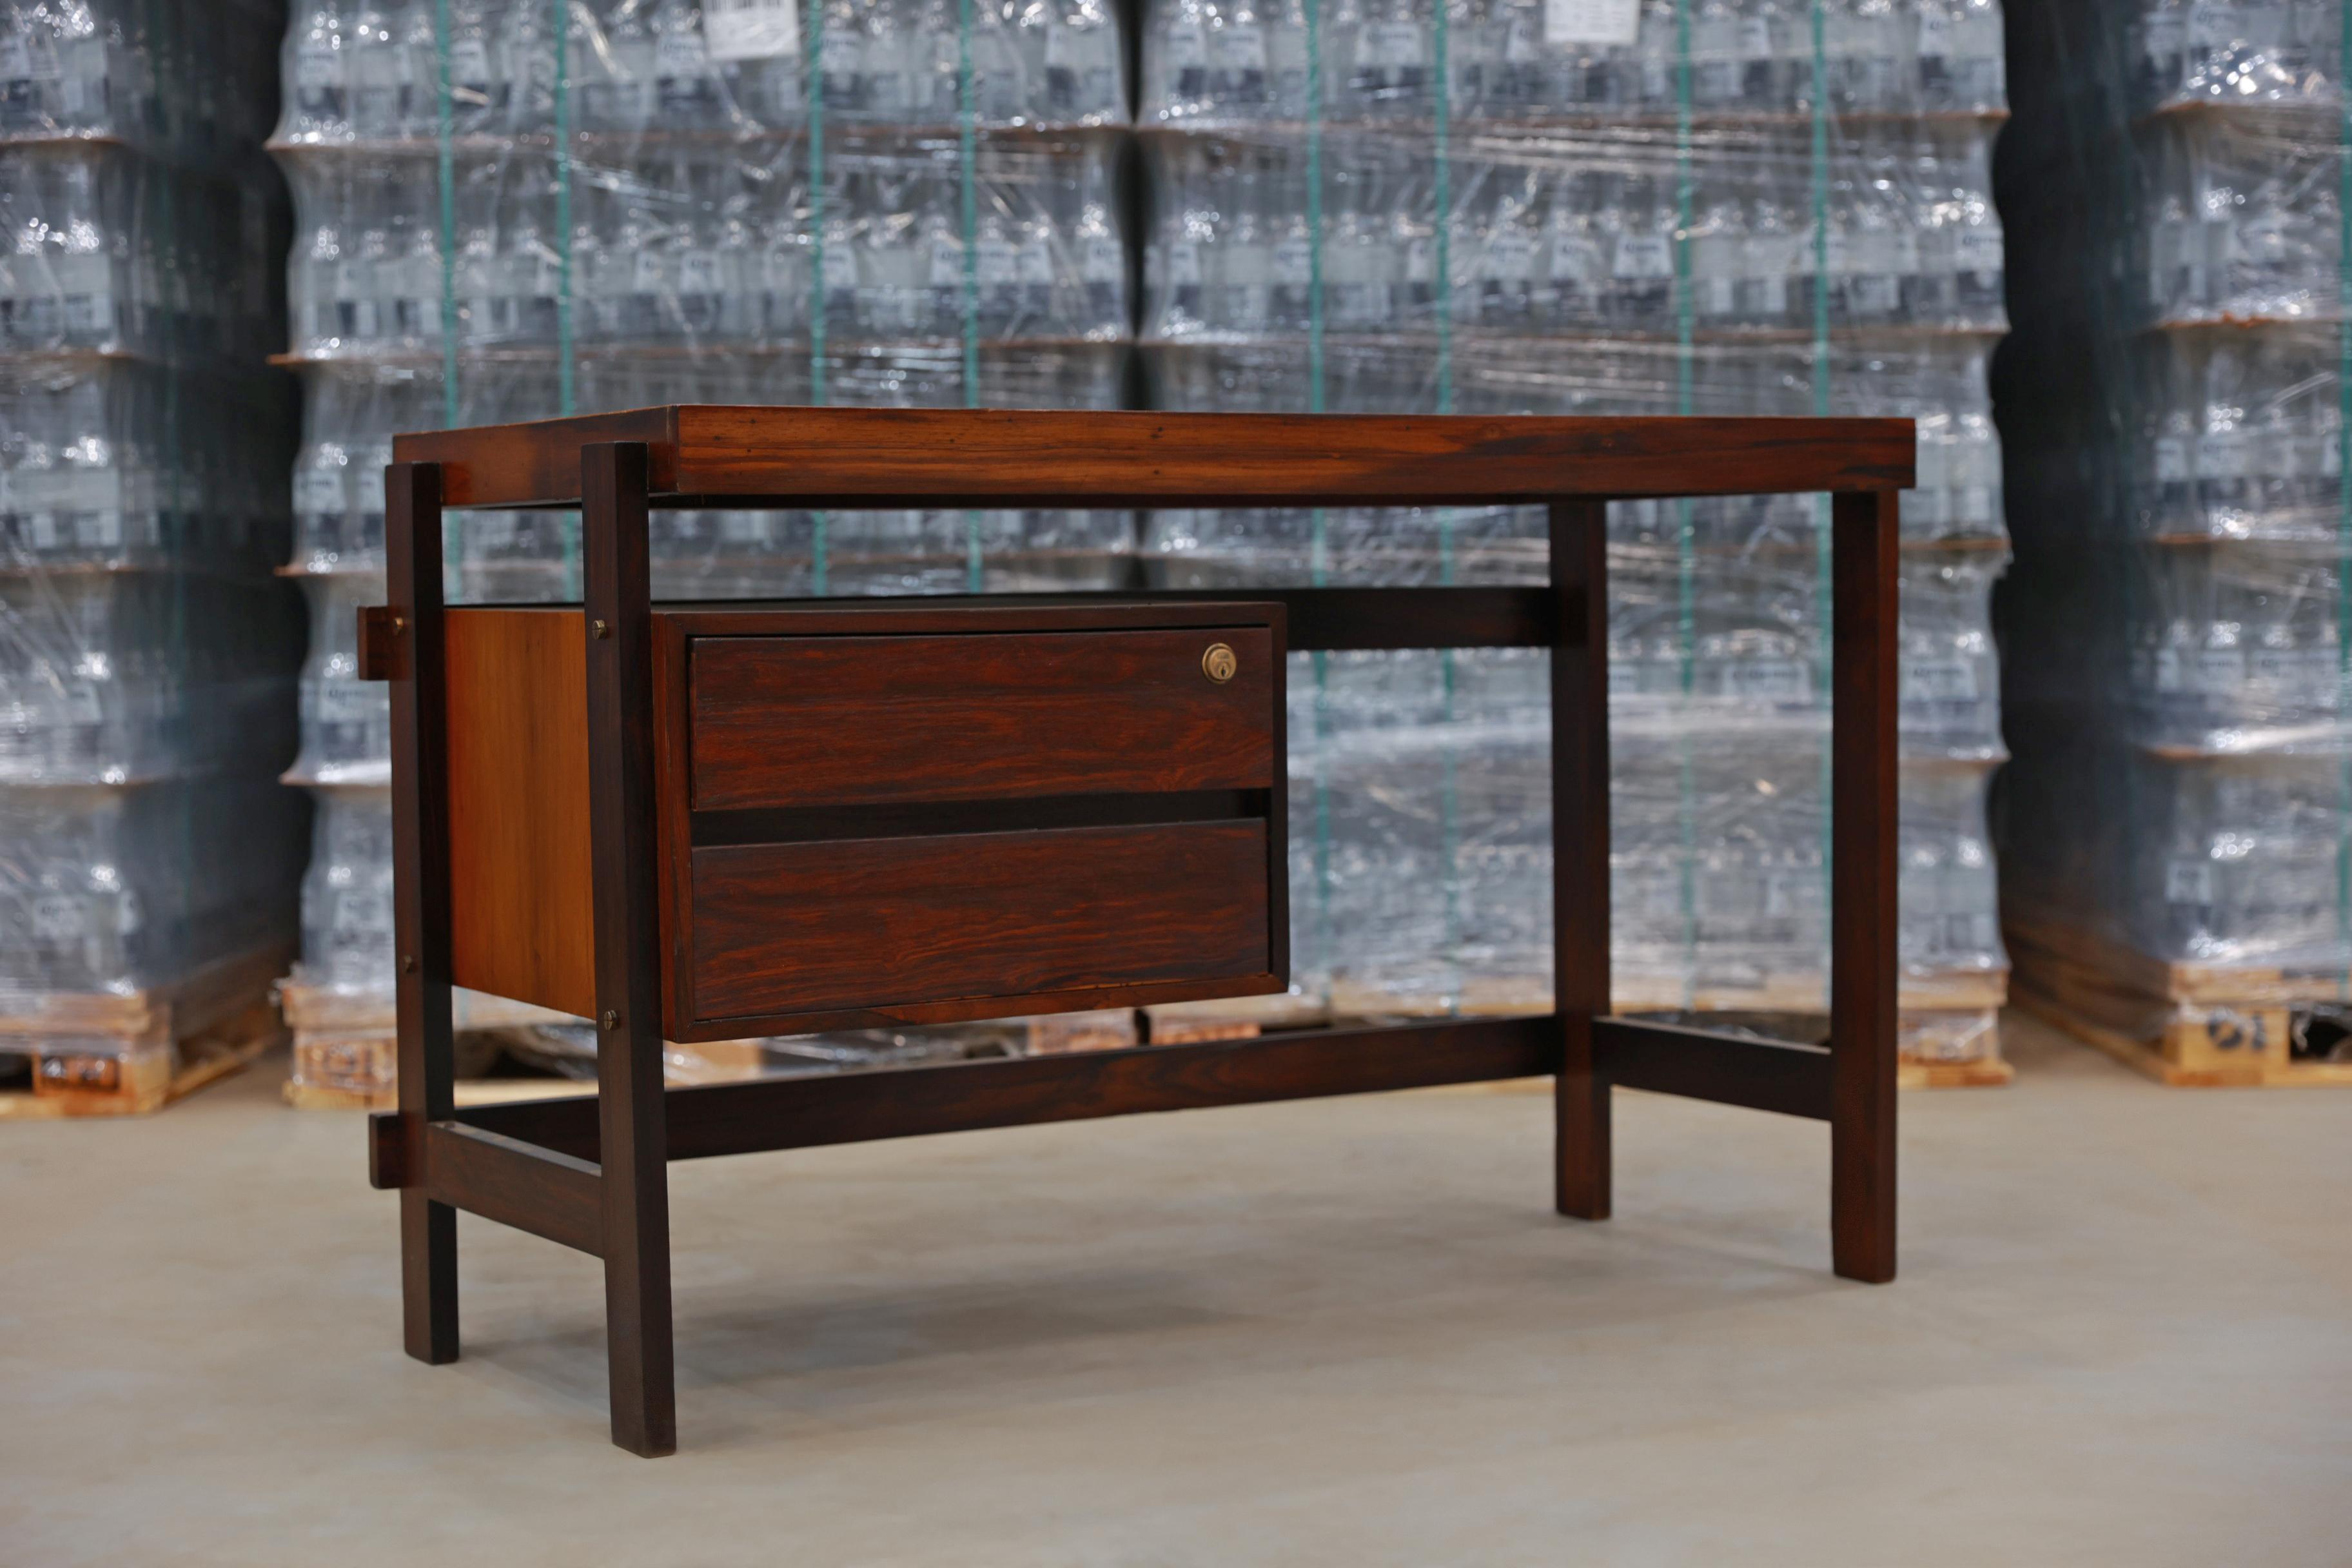 Woodwork Desk in Hardwood with Two Shelves by Fatima, 1960s, Brazil